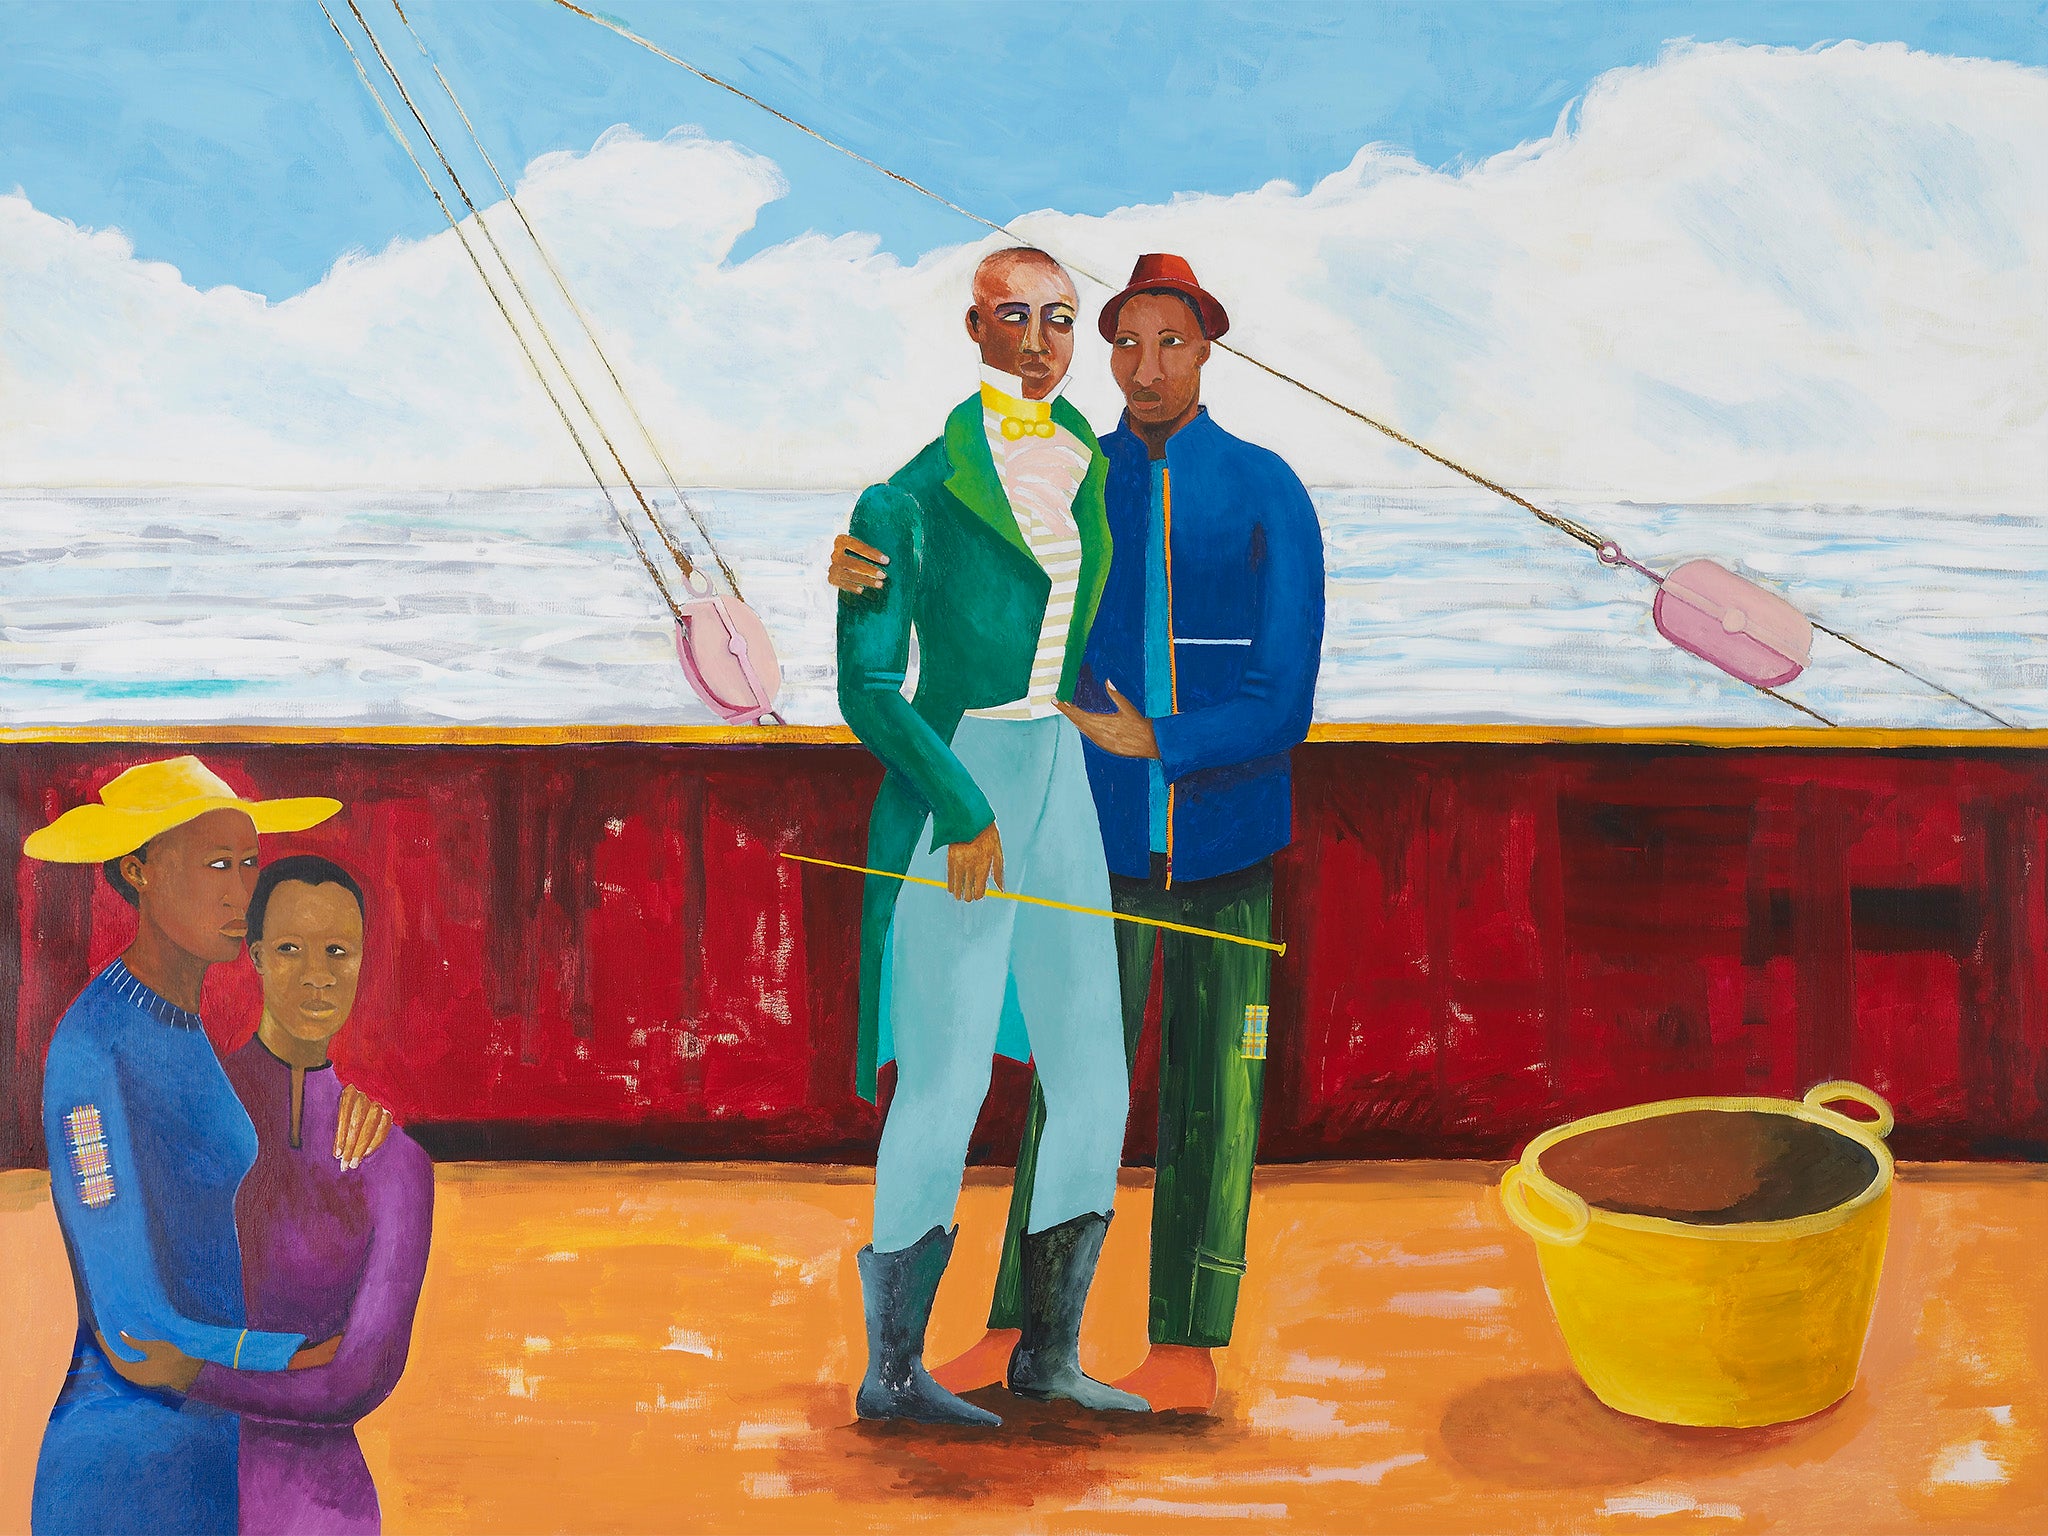 ‘The Captain and The Mate’ by Lubaina Himid